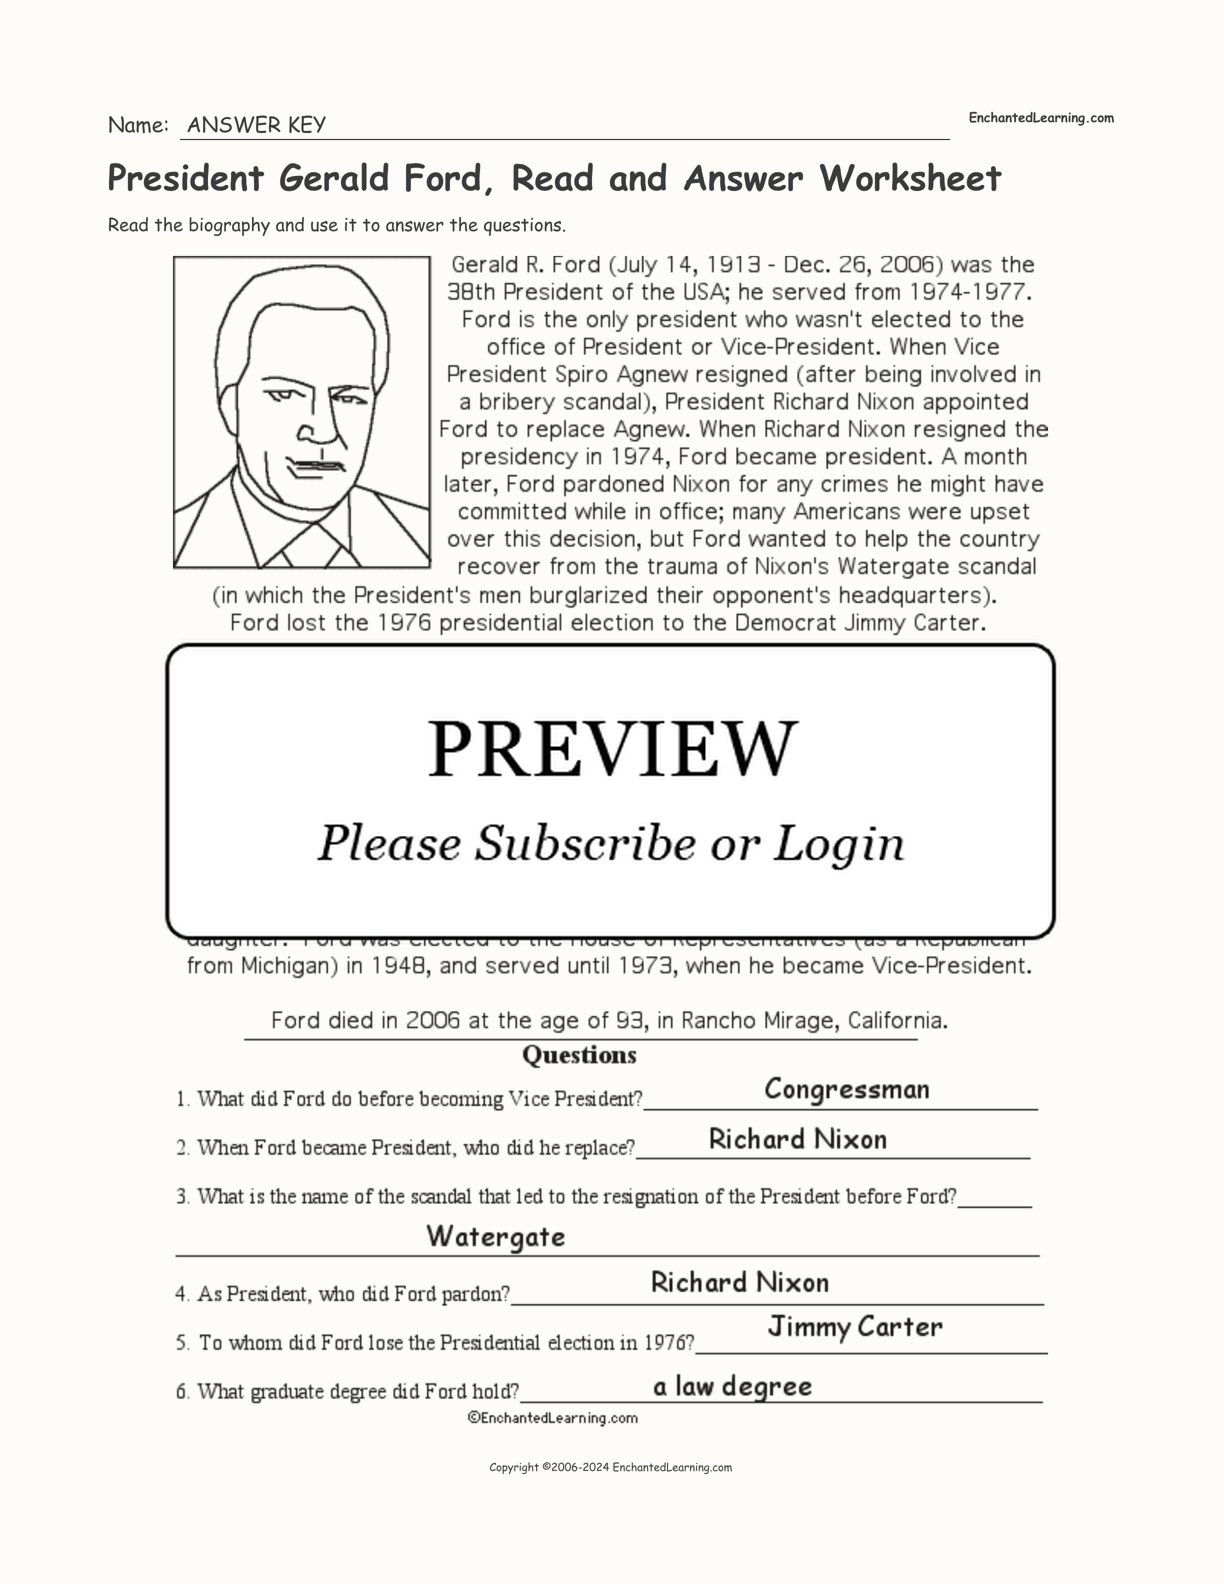 President Gerald Ford, Read and Answer Worksheet interactive worksheet page 2